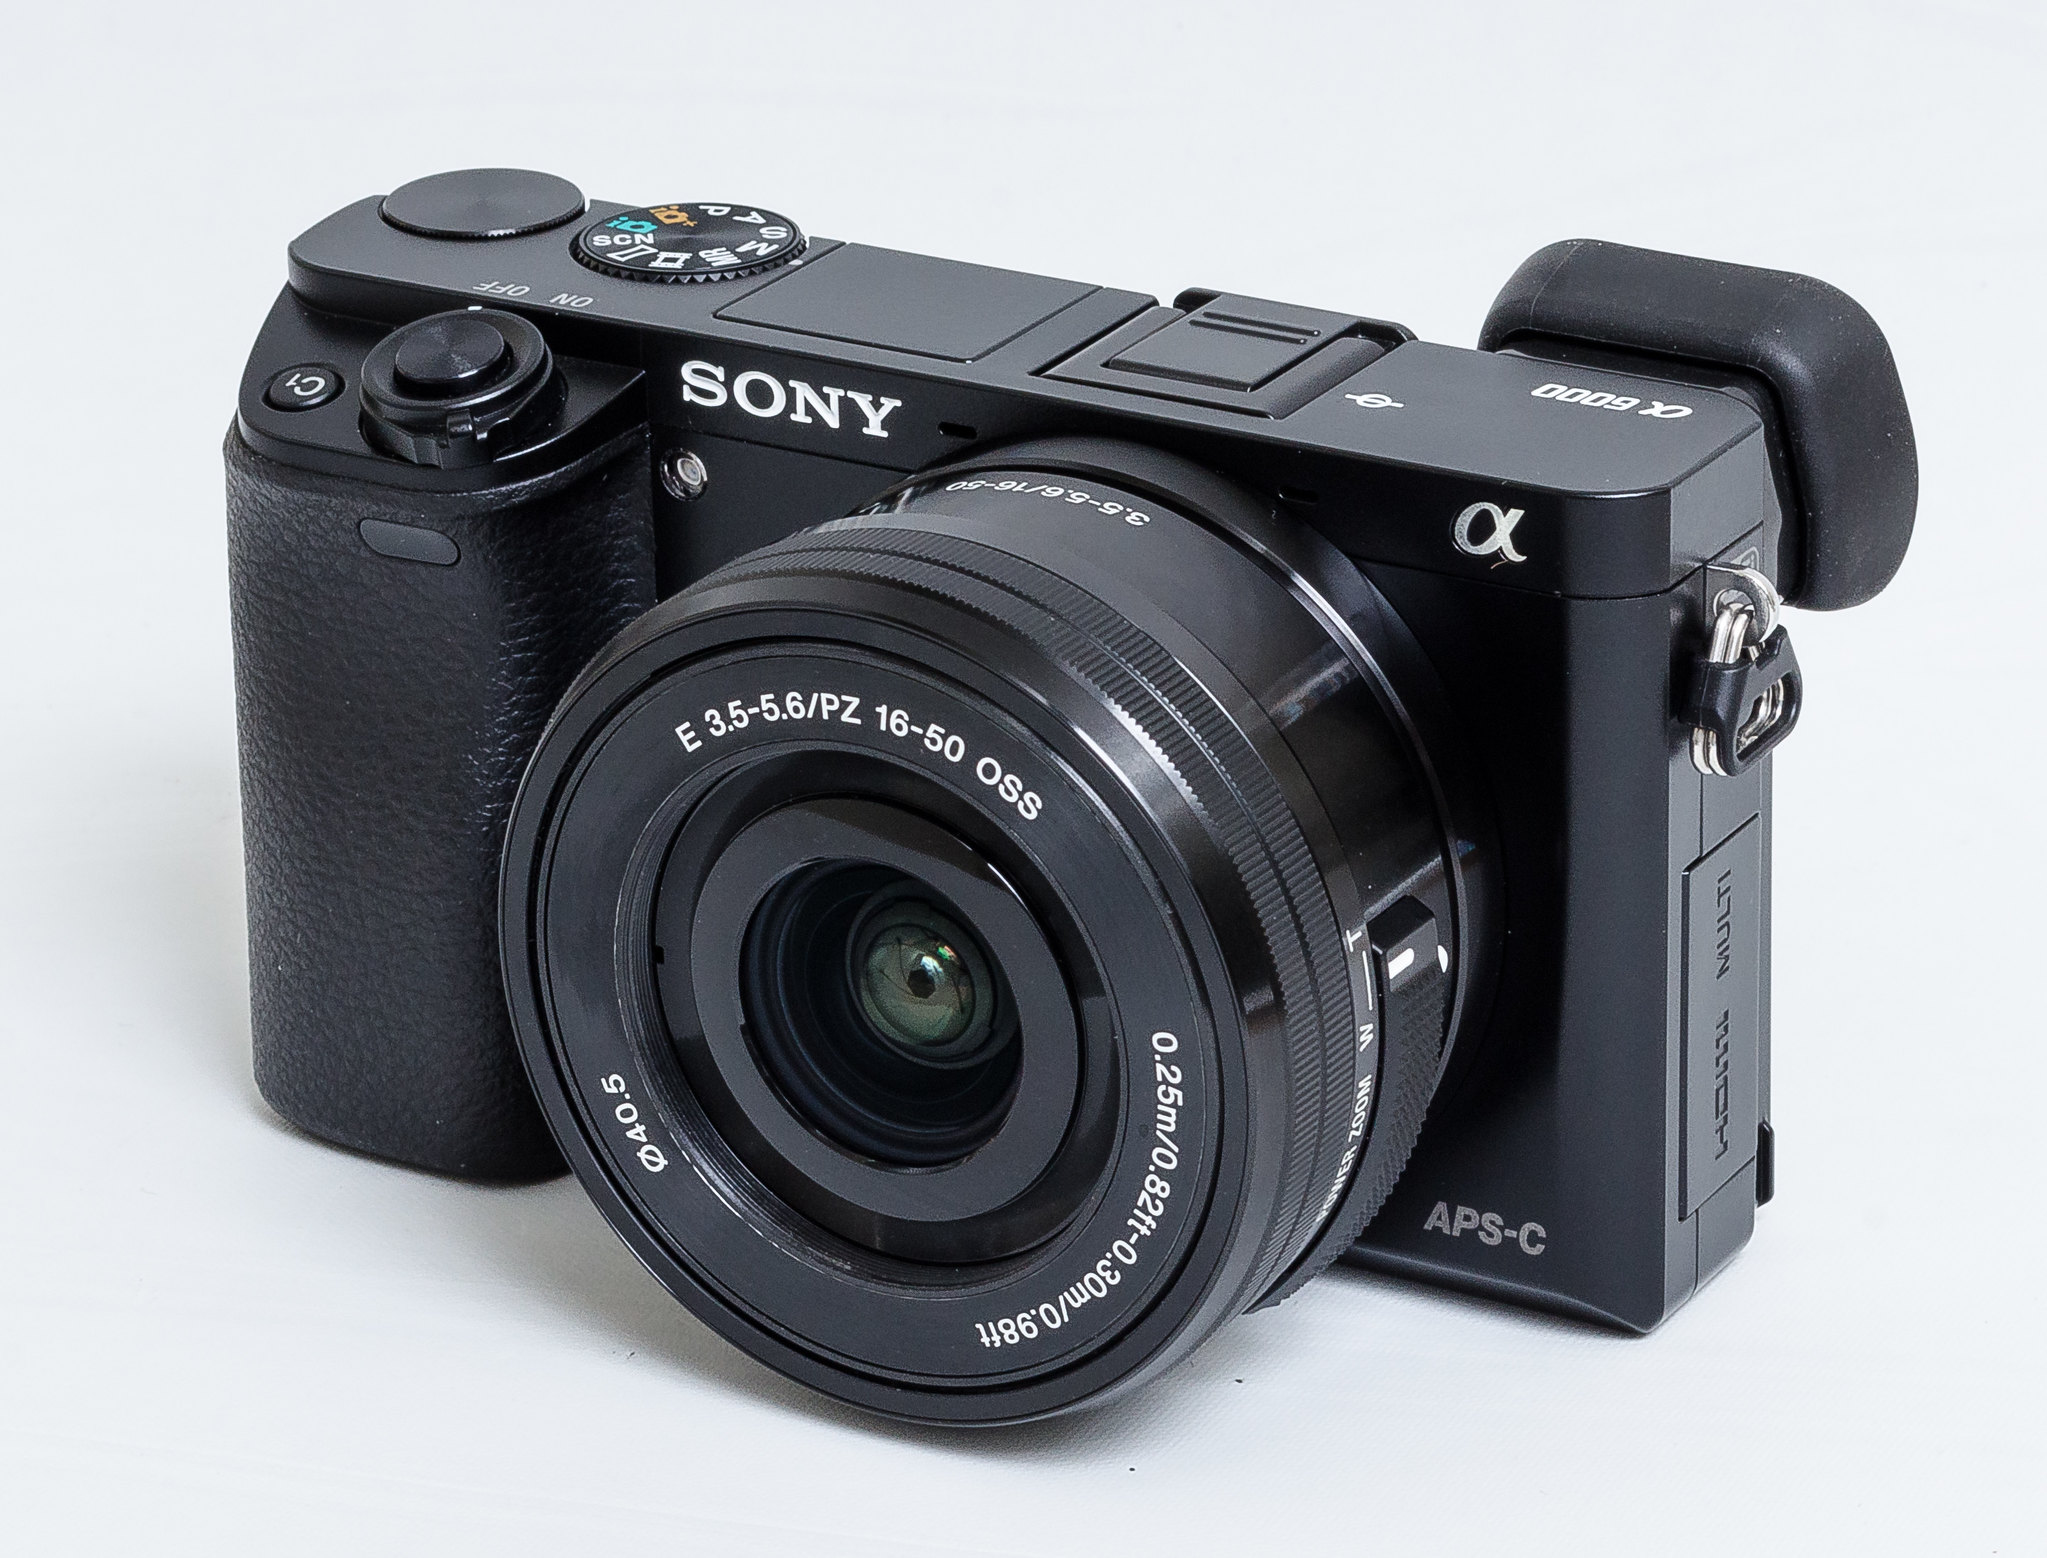 Discover how to modernize your Sony A6000 camera by upgrading its data transfer capabilities and post process images for super high resolution. Join the journey of enhancing your camera's features in this comprehensive blog post.